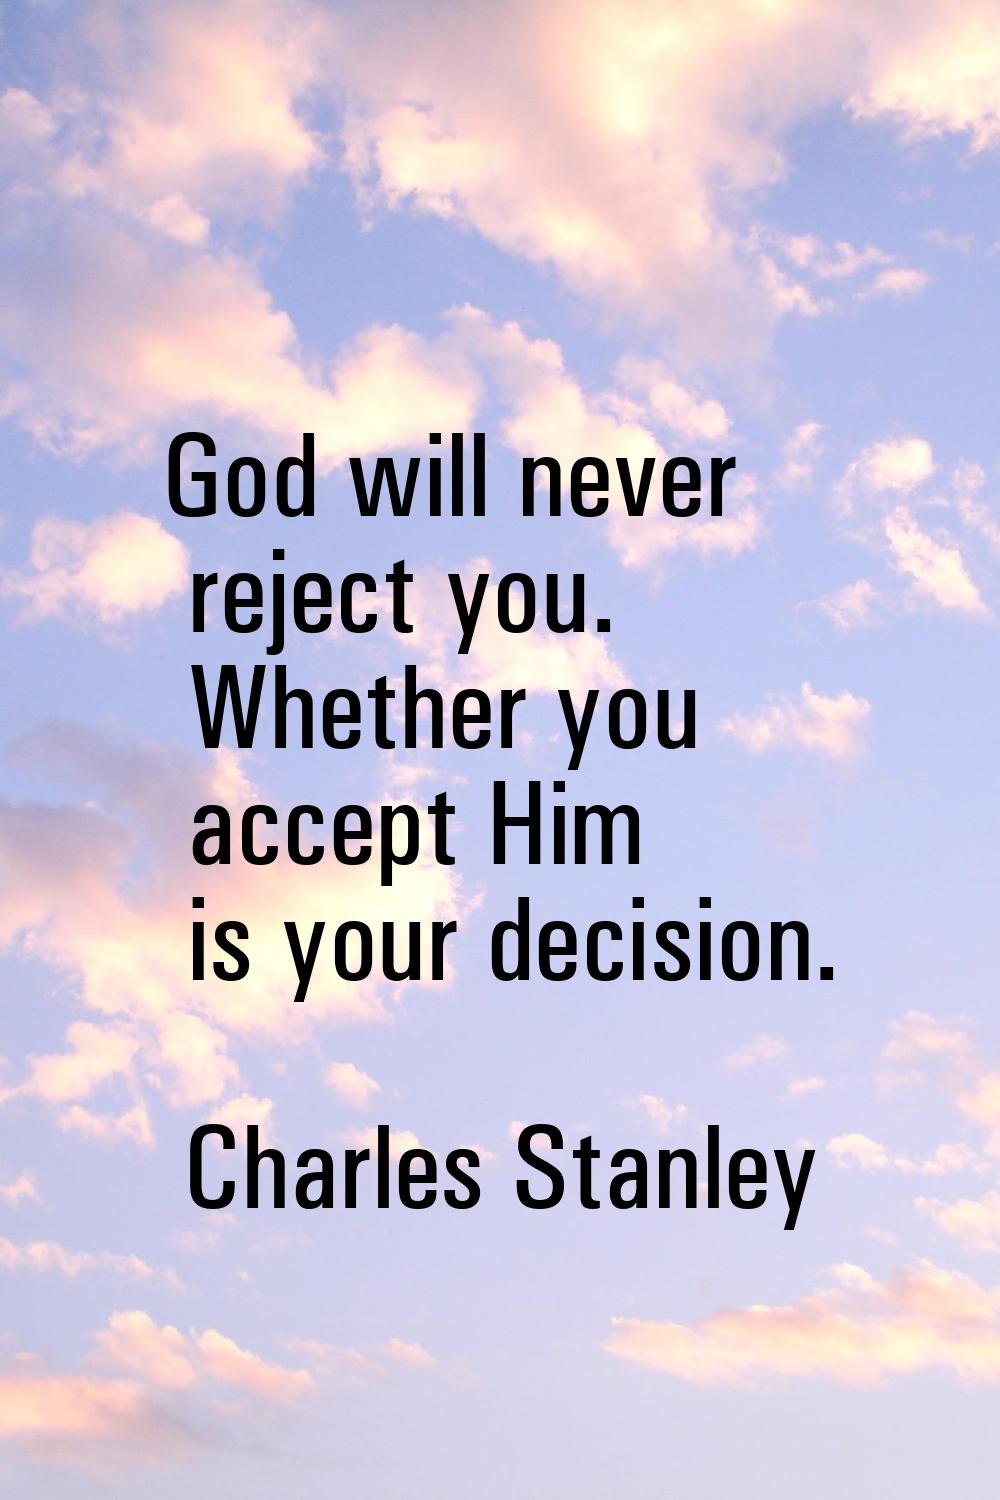 God will never reject you. Whether you accept Him is your decision.